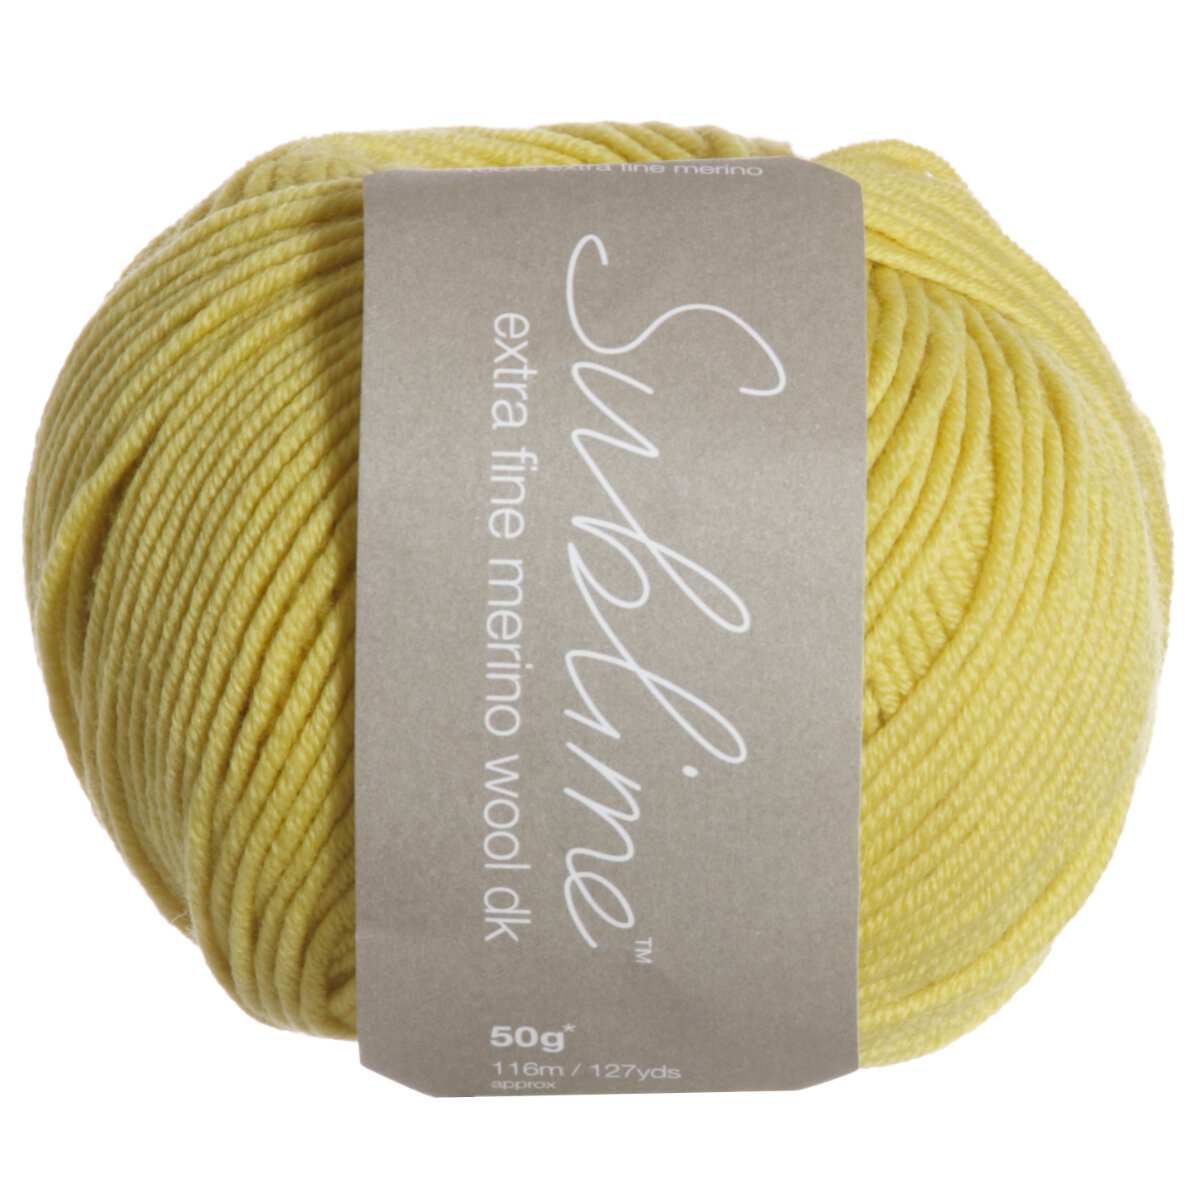 Sublime Extra Fine Merino Wool DK Yarn at Jimmy Beans Wool